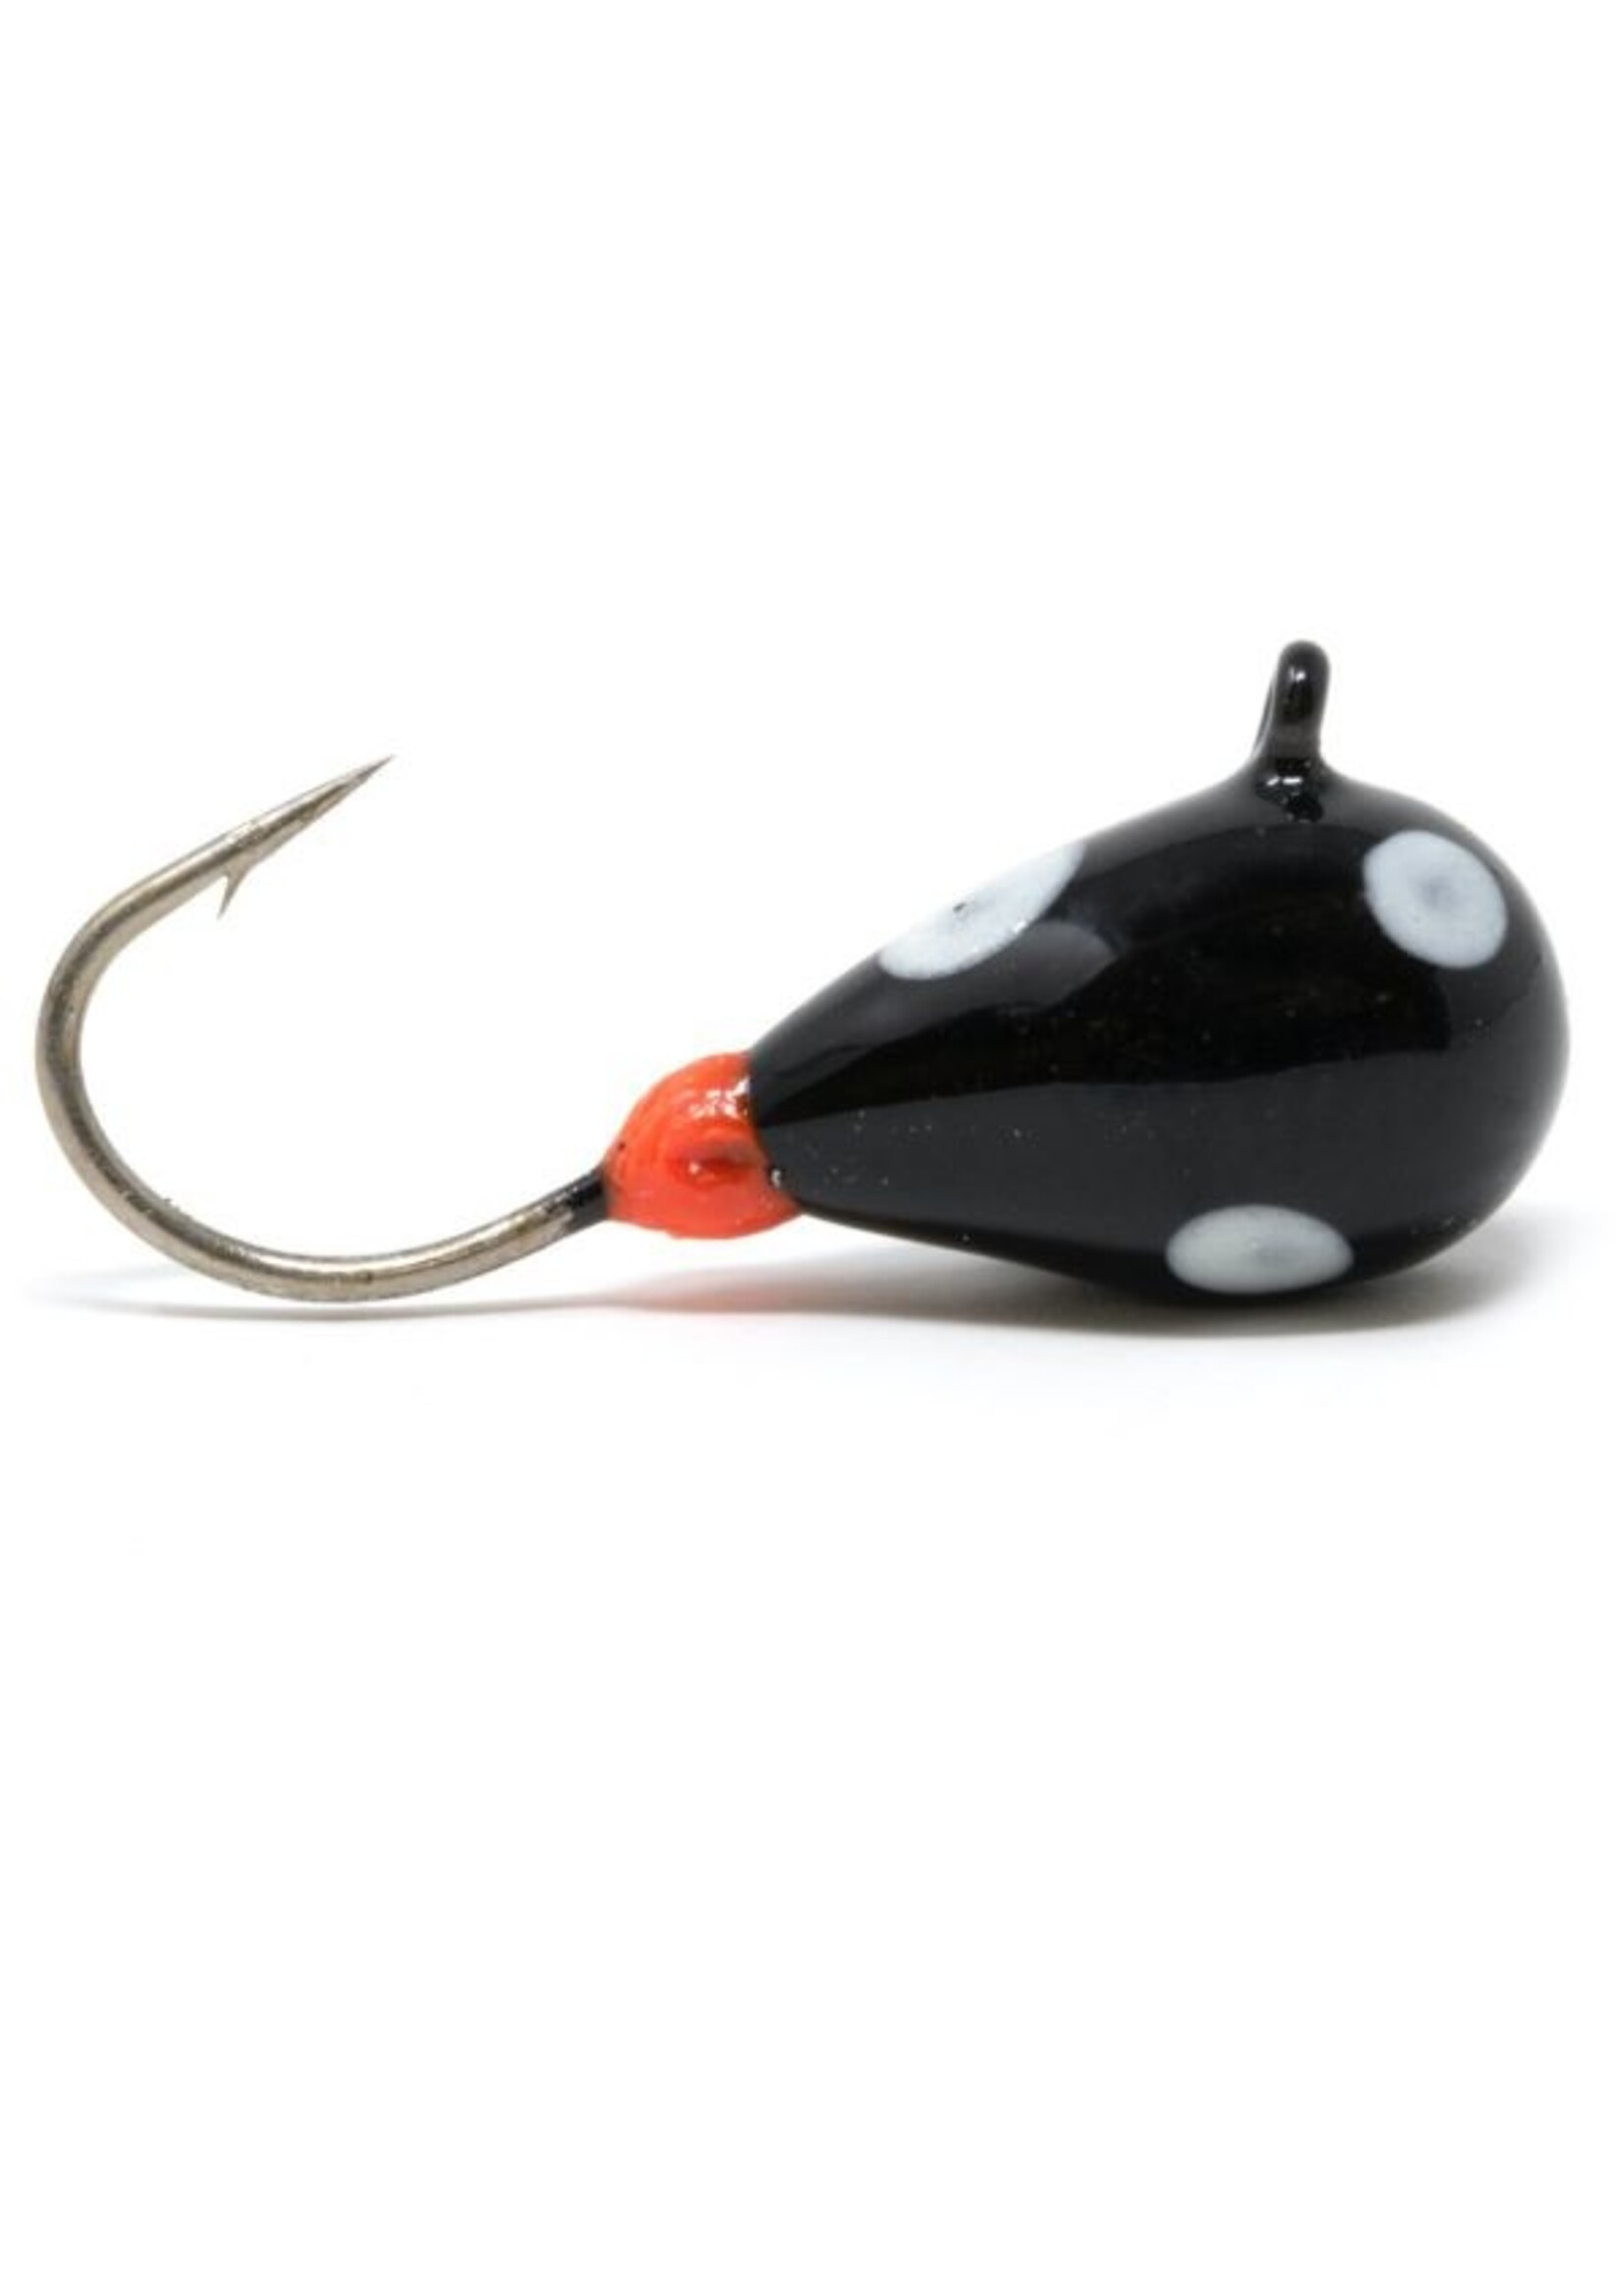 Clam The Drop Tungsten Jig - Tackle Shack